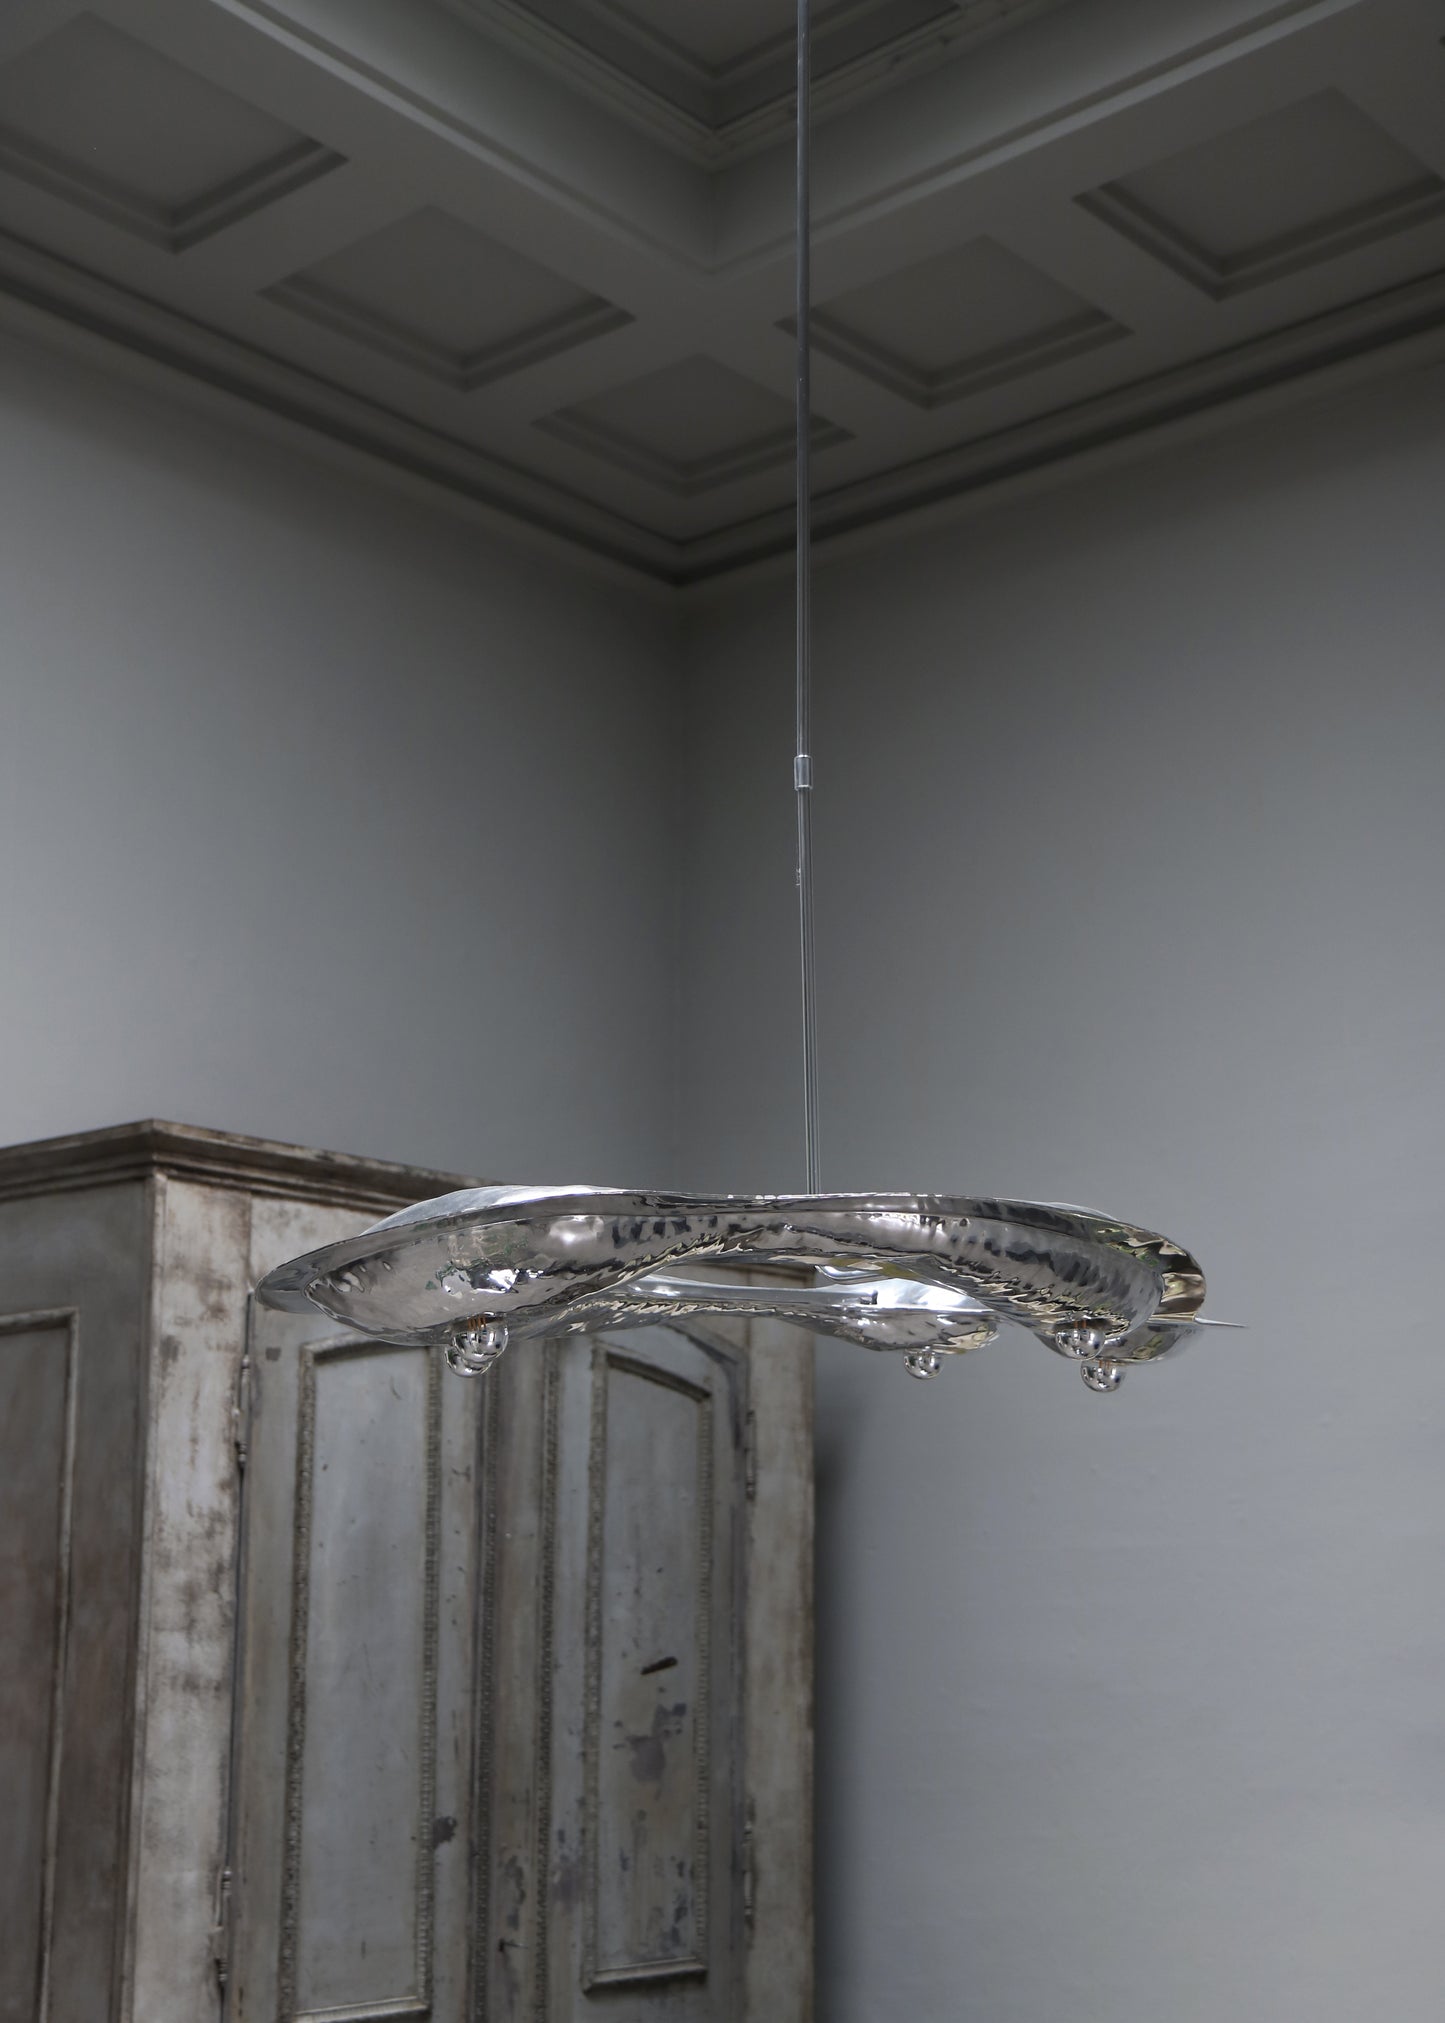 ELECTRICAL CHANDELIER by Christian+Jade